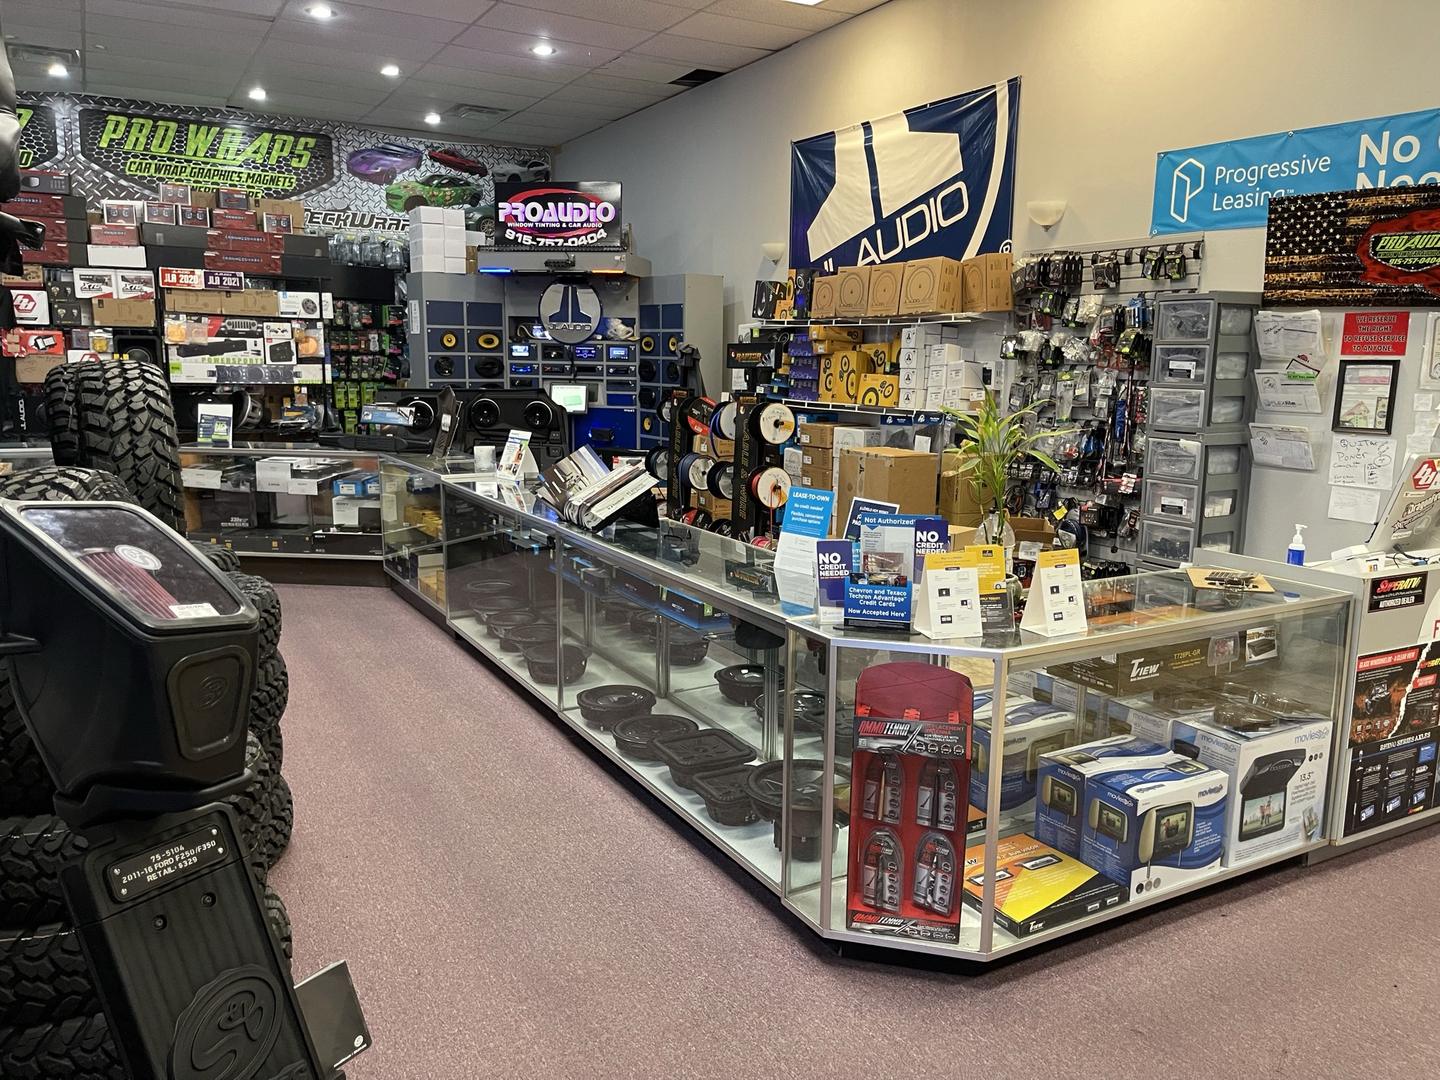 The Pro Audio Store of Upgrade Parts